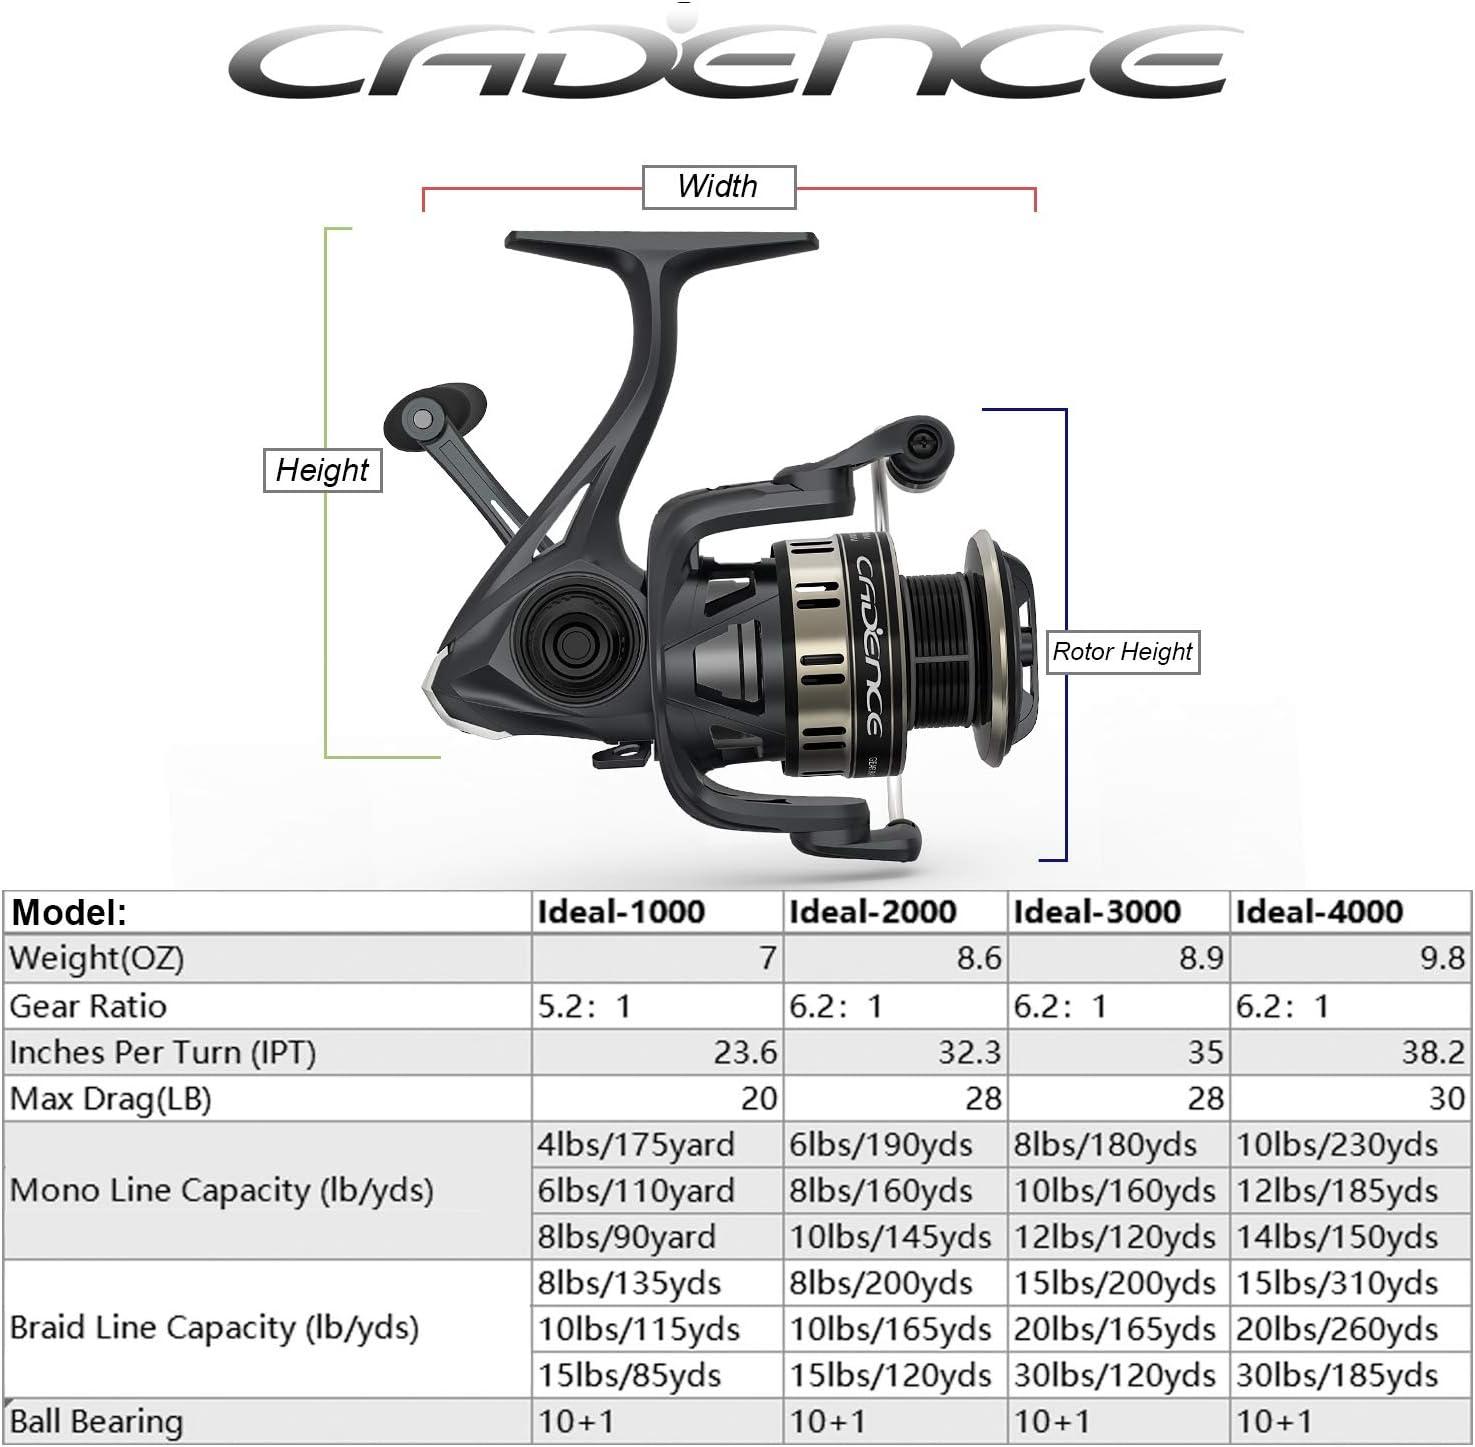 Cadence Ideal Spinning Reel, Super Smooth Fishing Reels with 10 +